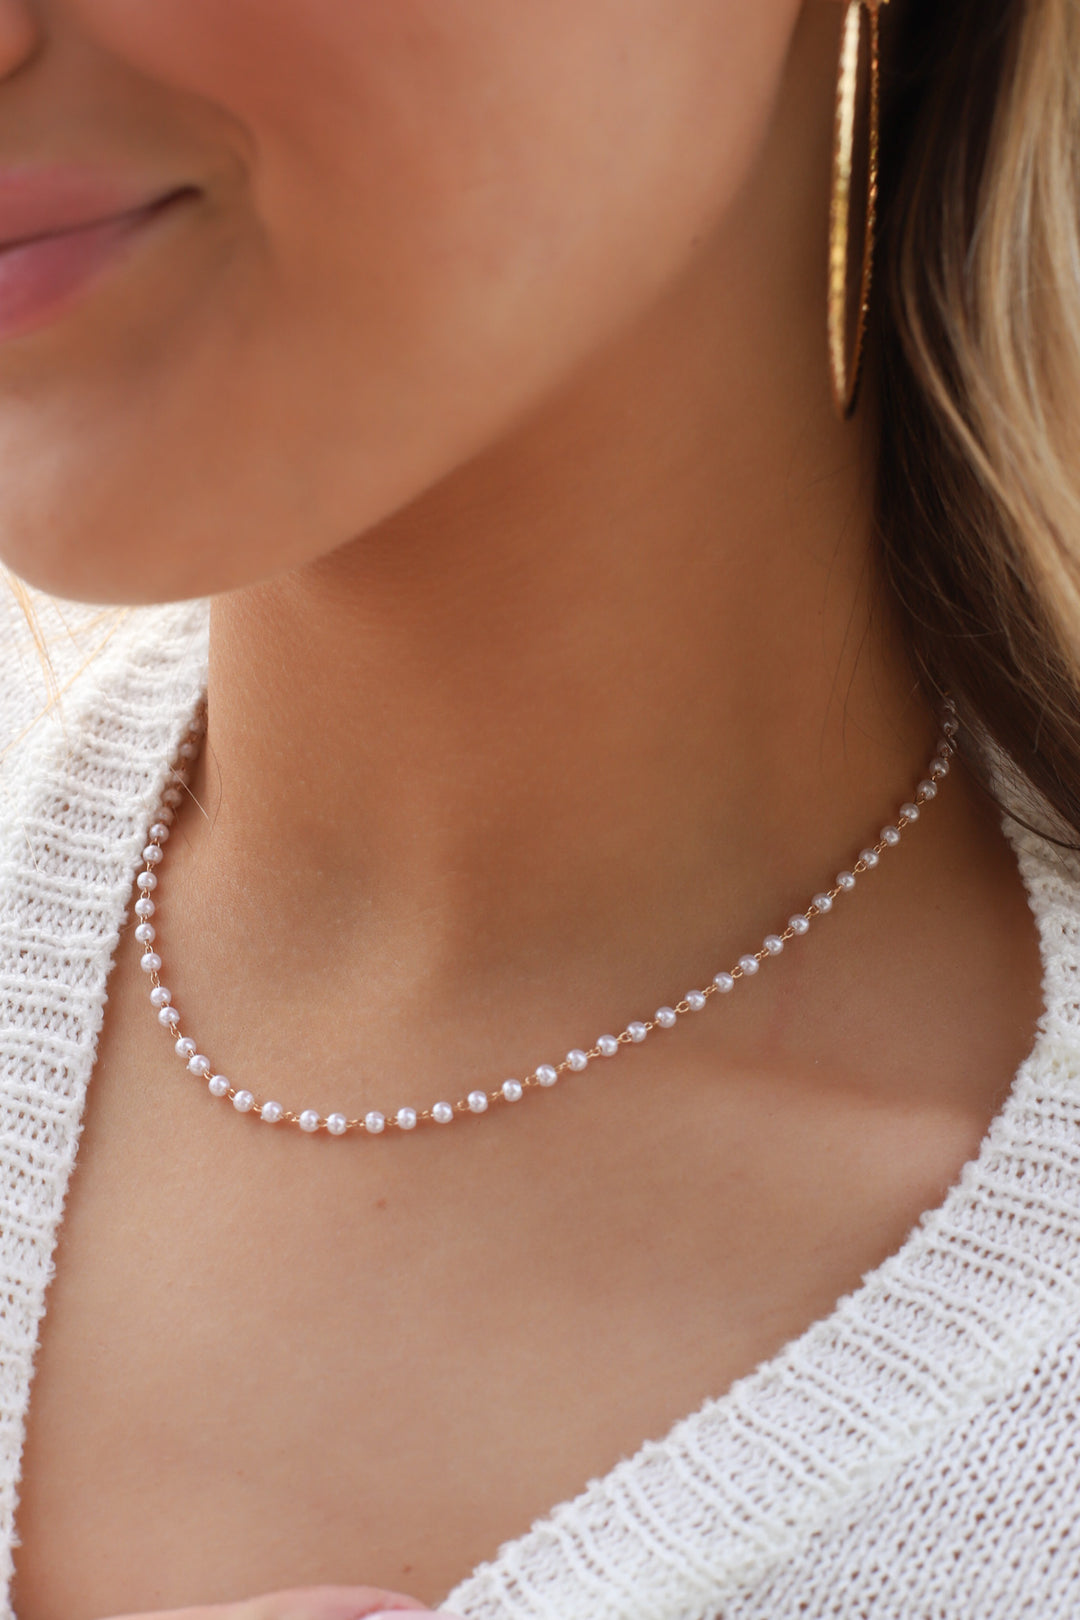 Atlas Pearl Necklace - ShopSpoiled